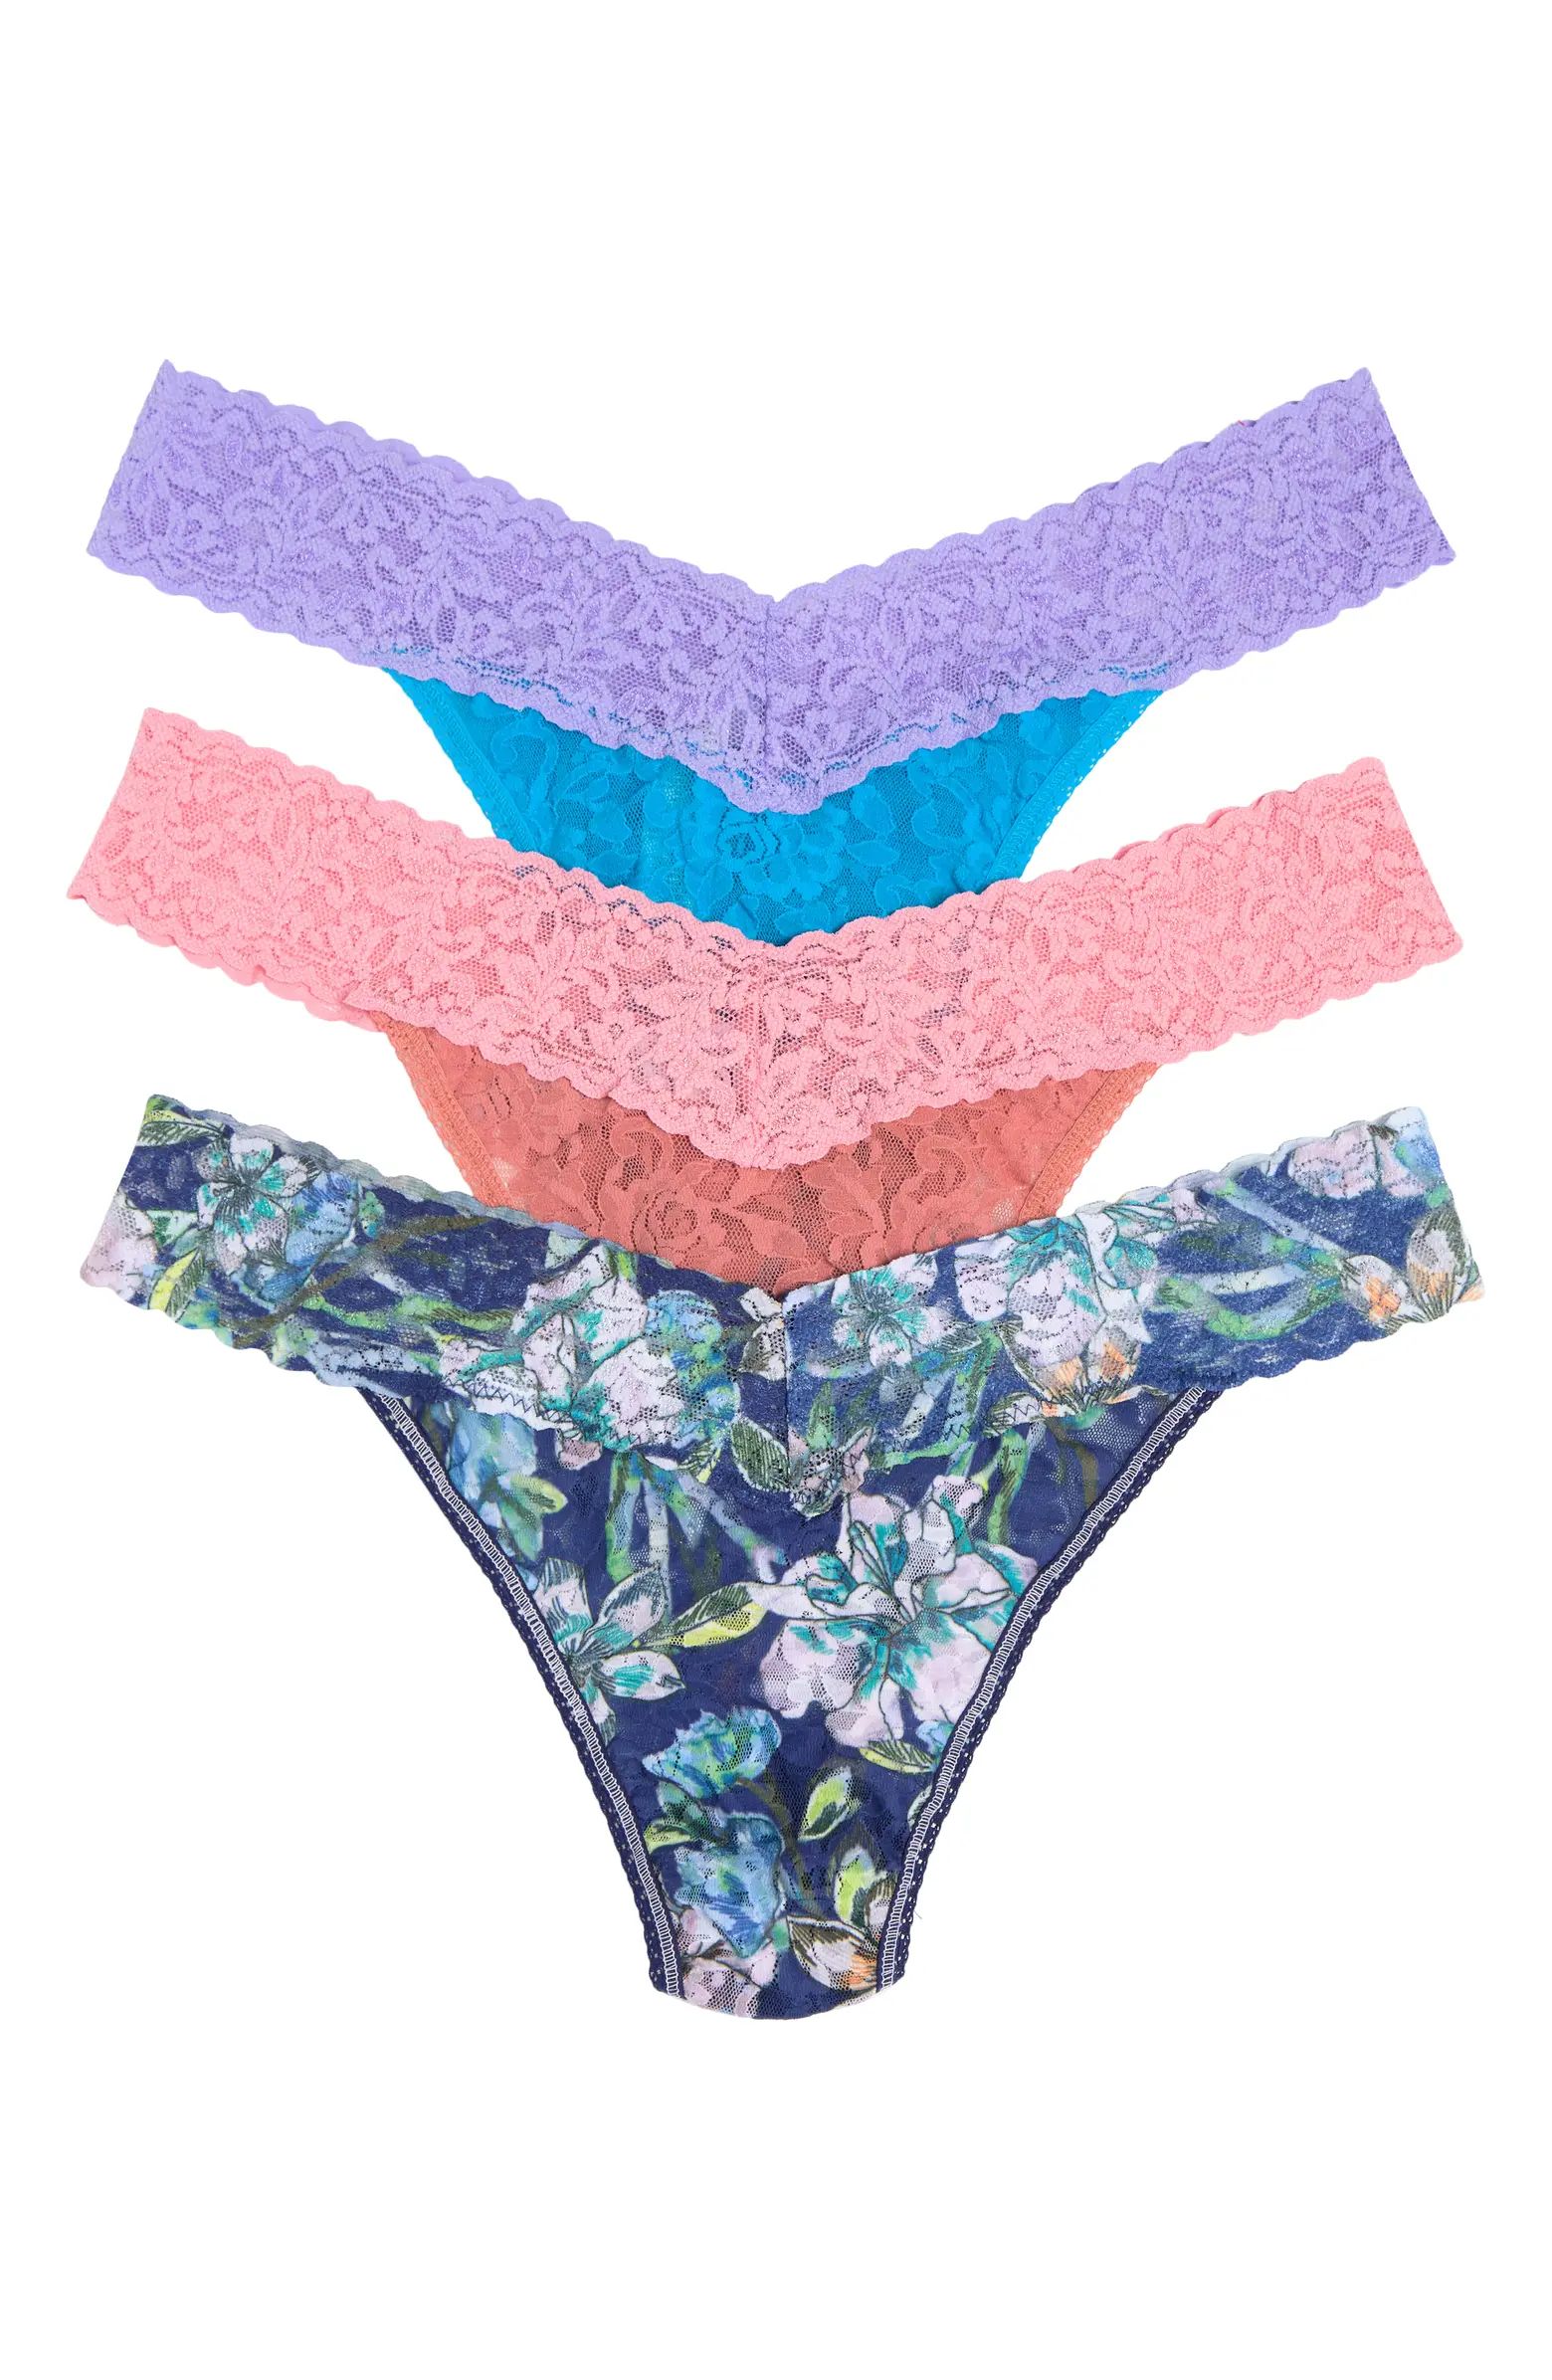 Original Rise Stretch Lace Thong Panties - Pack of 3 | Nordstrom Rack